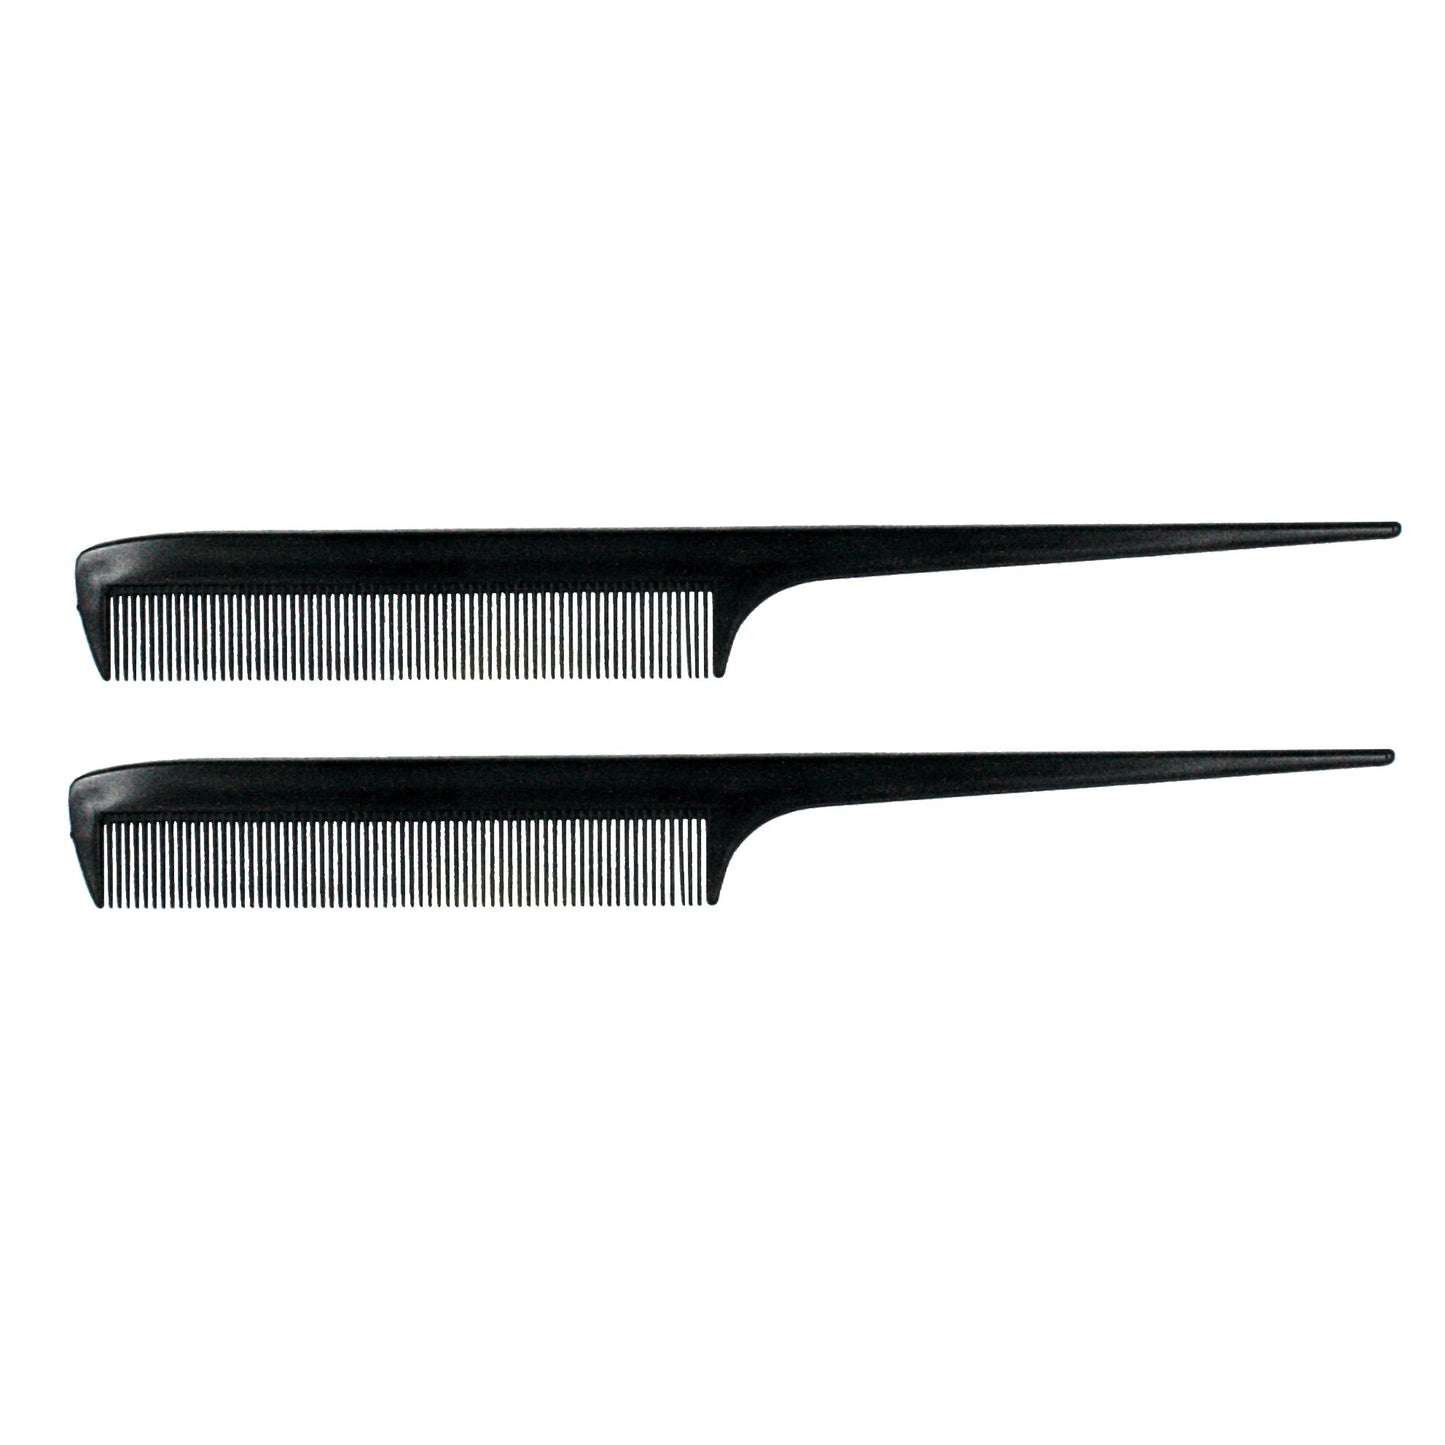 Amelia Beauty, 8.5in Black Plastic Pin Rat Tail Fine Tooth Comb, Professional Grade Hair Comb, For Highlighting, Sectioning & Styling Hair with Long Tail Tip, Wet or Dry, 8.5"x1", 2 Pack